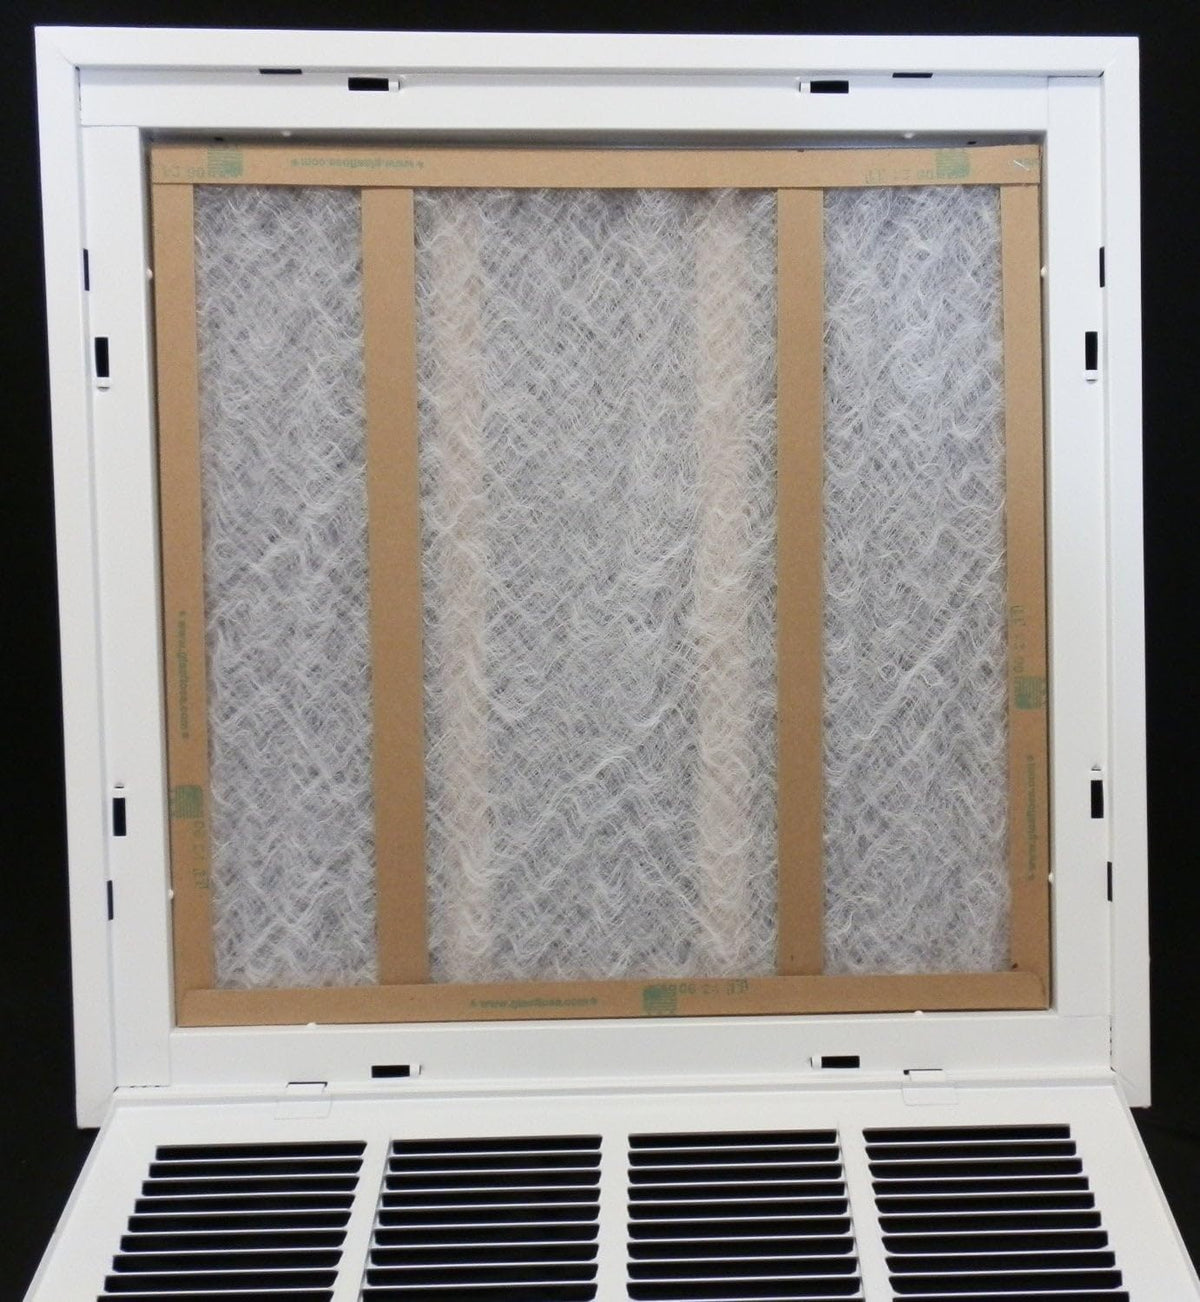 22&quot; X 26&quot; Steel Return Air Filter Grille for 1&quot; Filter - Removable Frame - [Outer Dimensions: 24 5/8&quot; X 28 5/8&quot;]